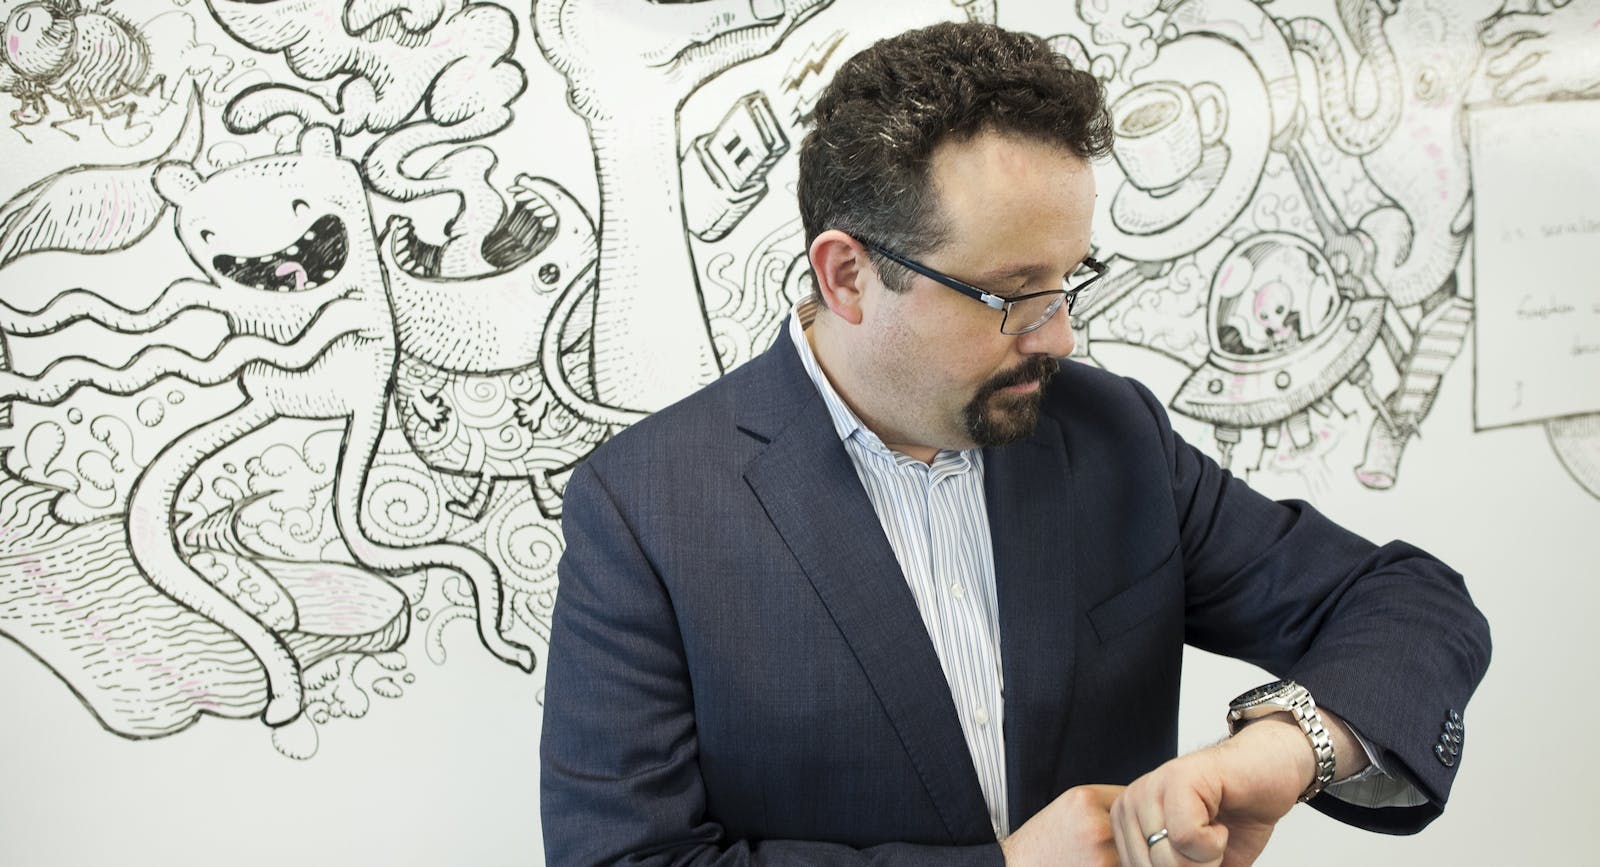 Evernote CEO Phil Libin. Photo by Evernote.